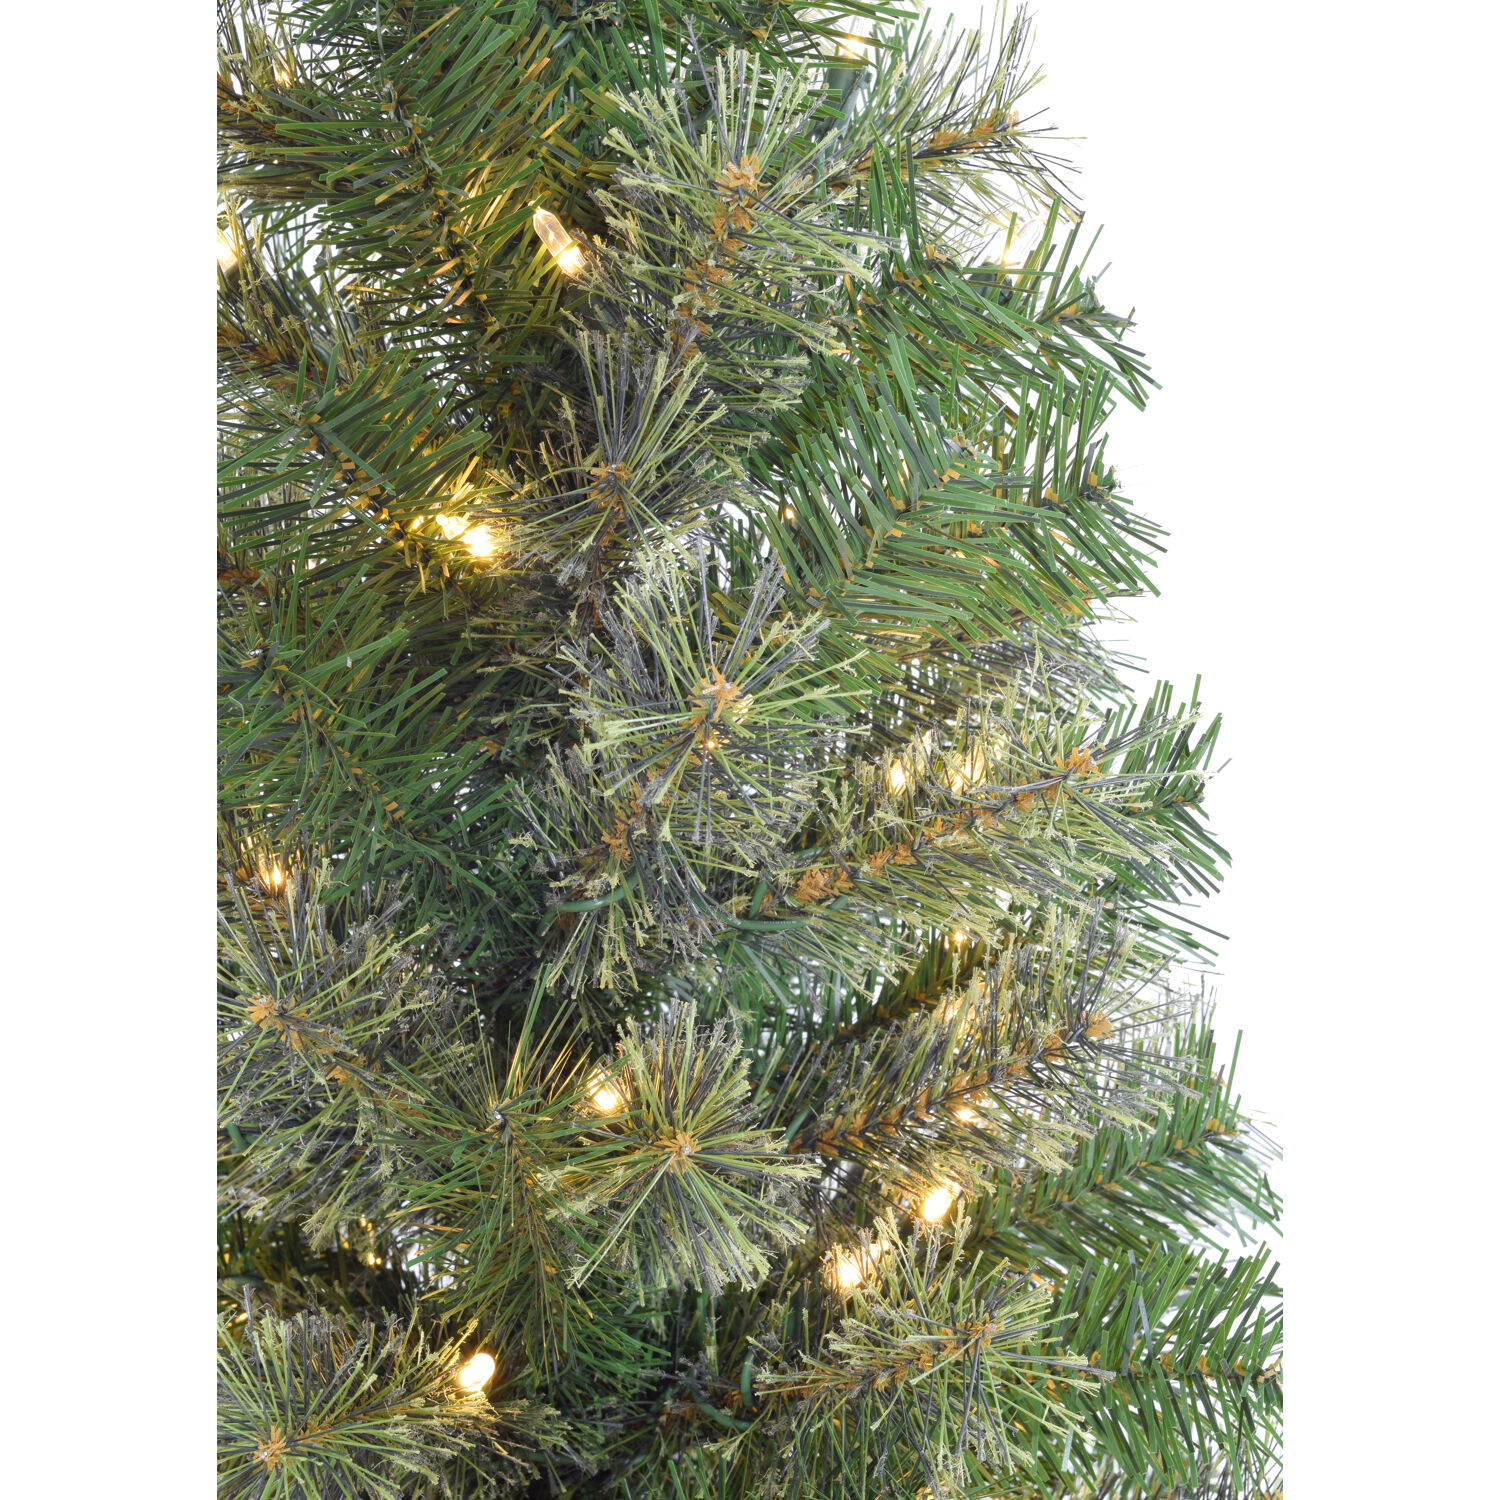 Fraser Hill Farm 4-Ft. Set of 2 Porch Accent Tree in Black Pot with Warm White LED Lighting - image 3 of 6